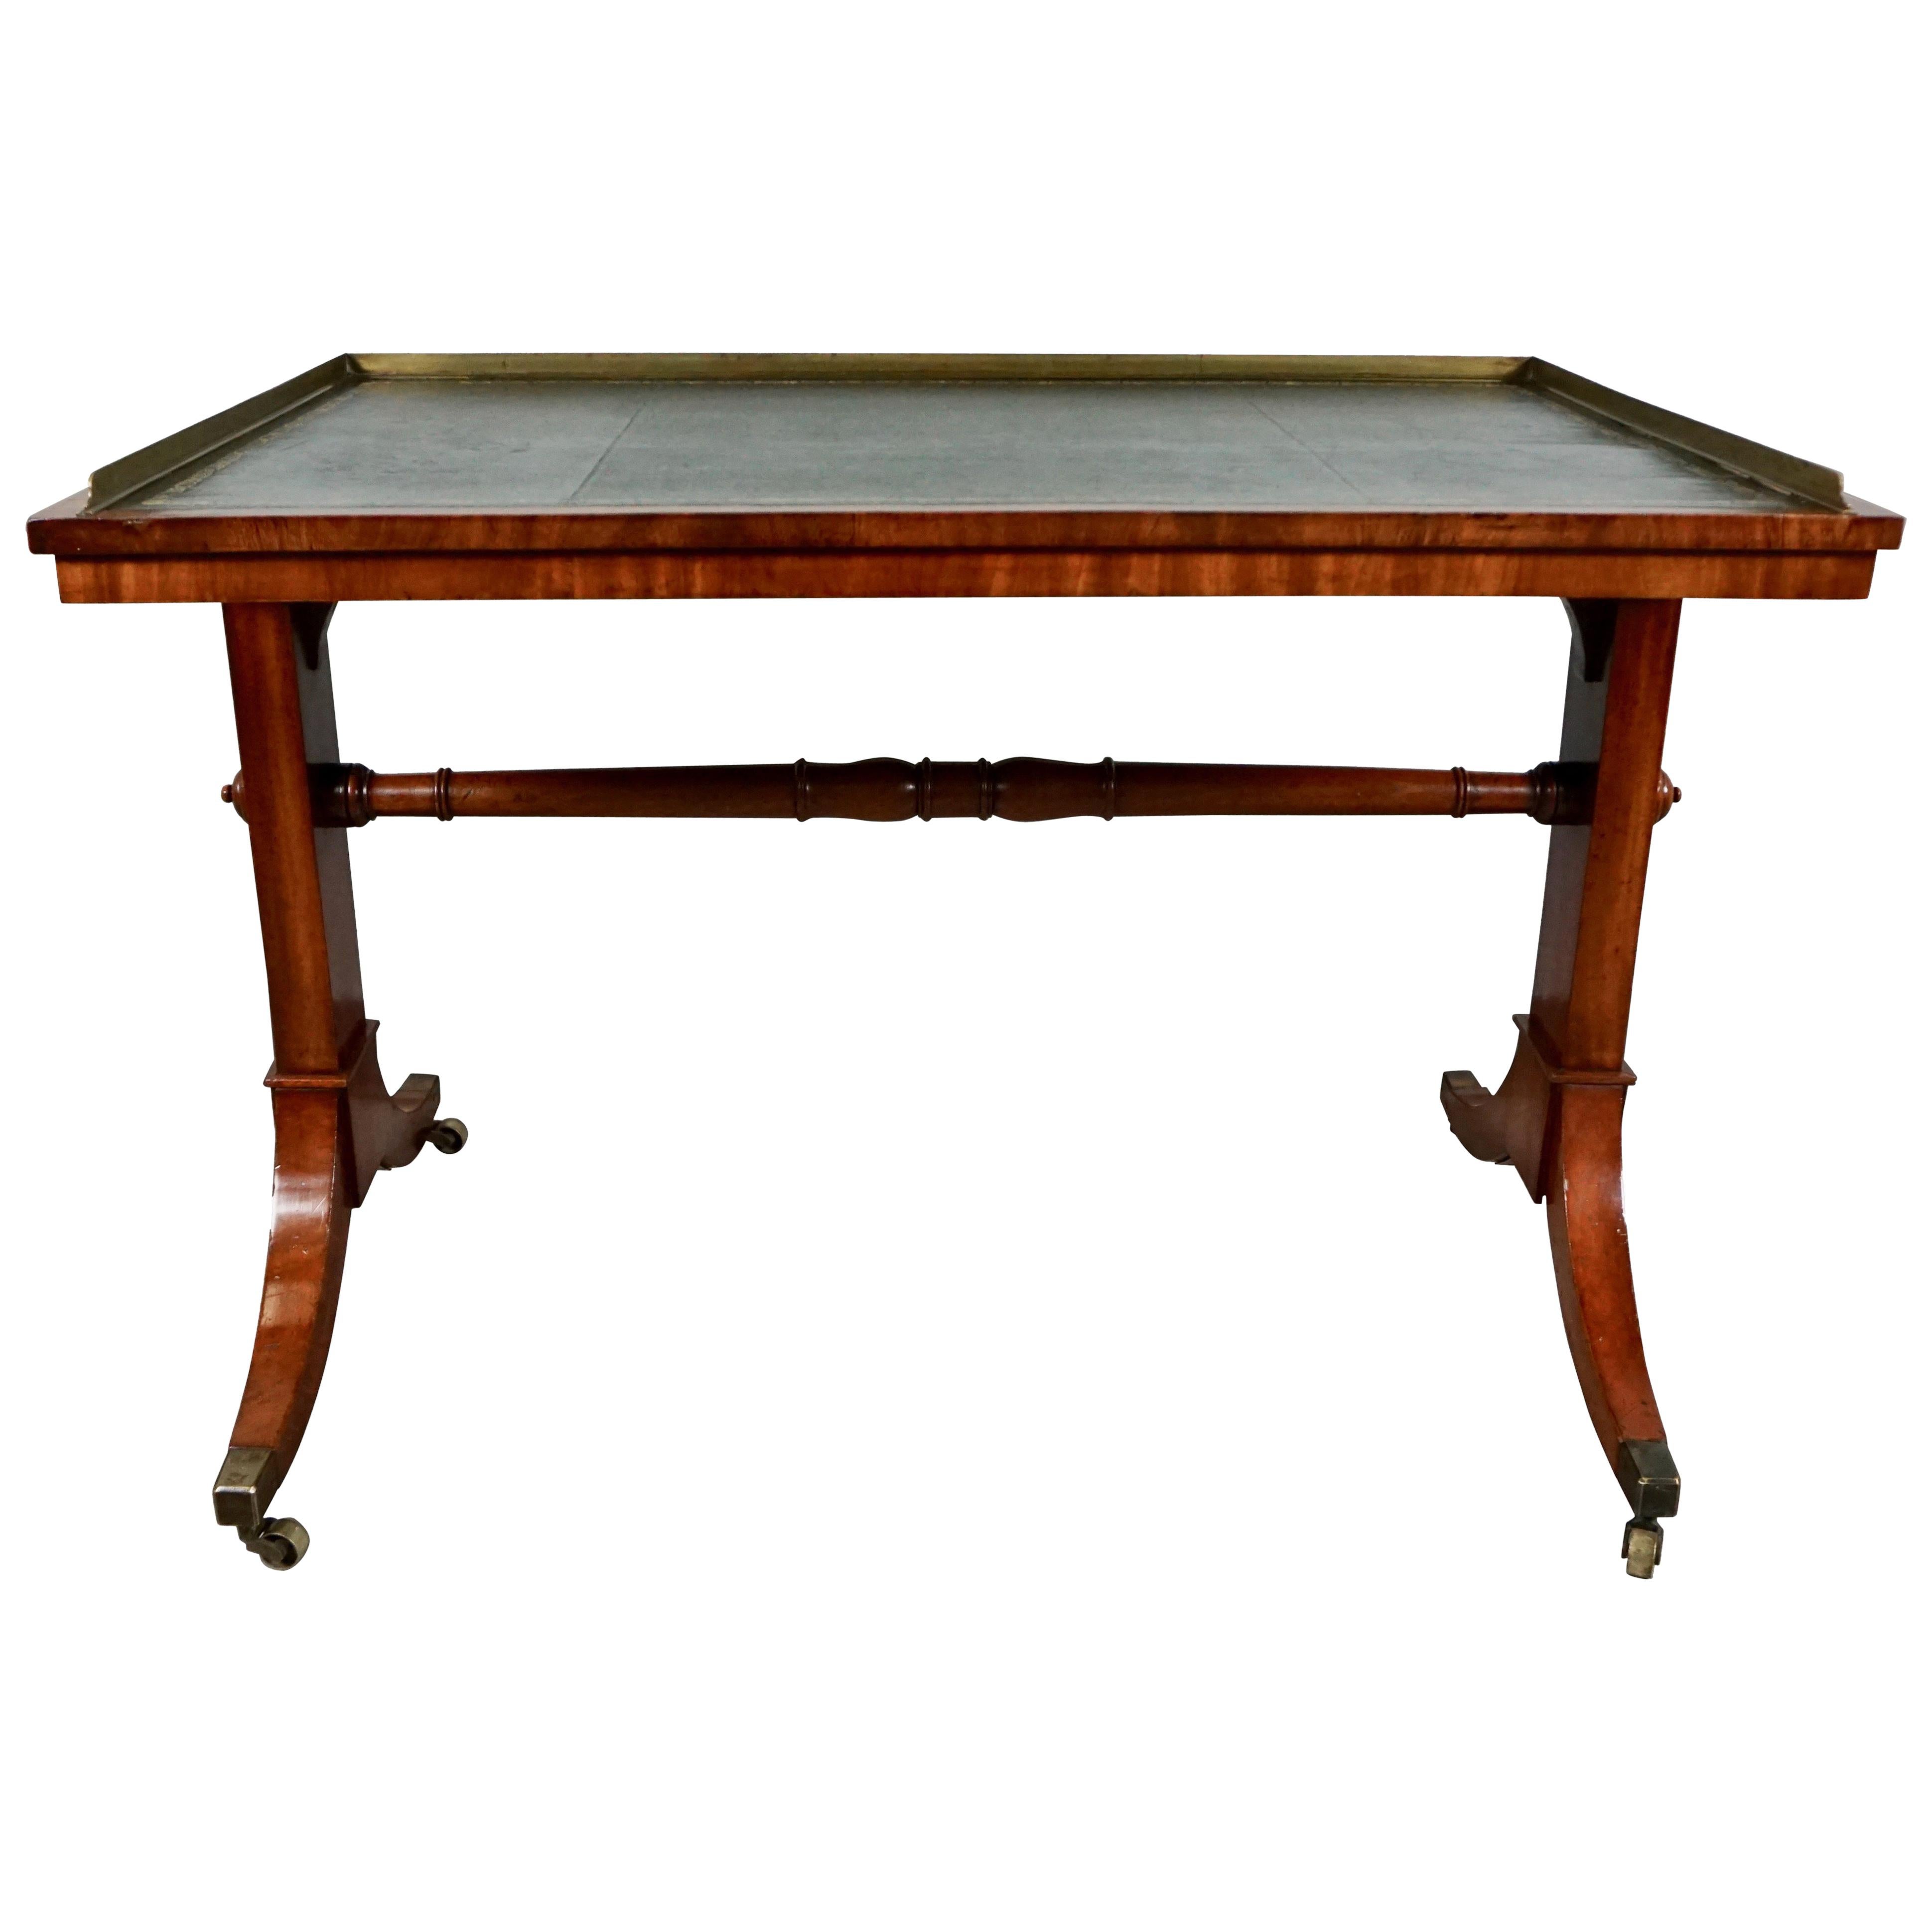 English Regency Period Writing Table with Brass Gallery and Tooled Leather Top